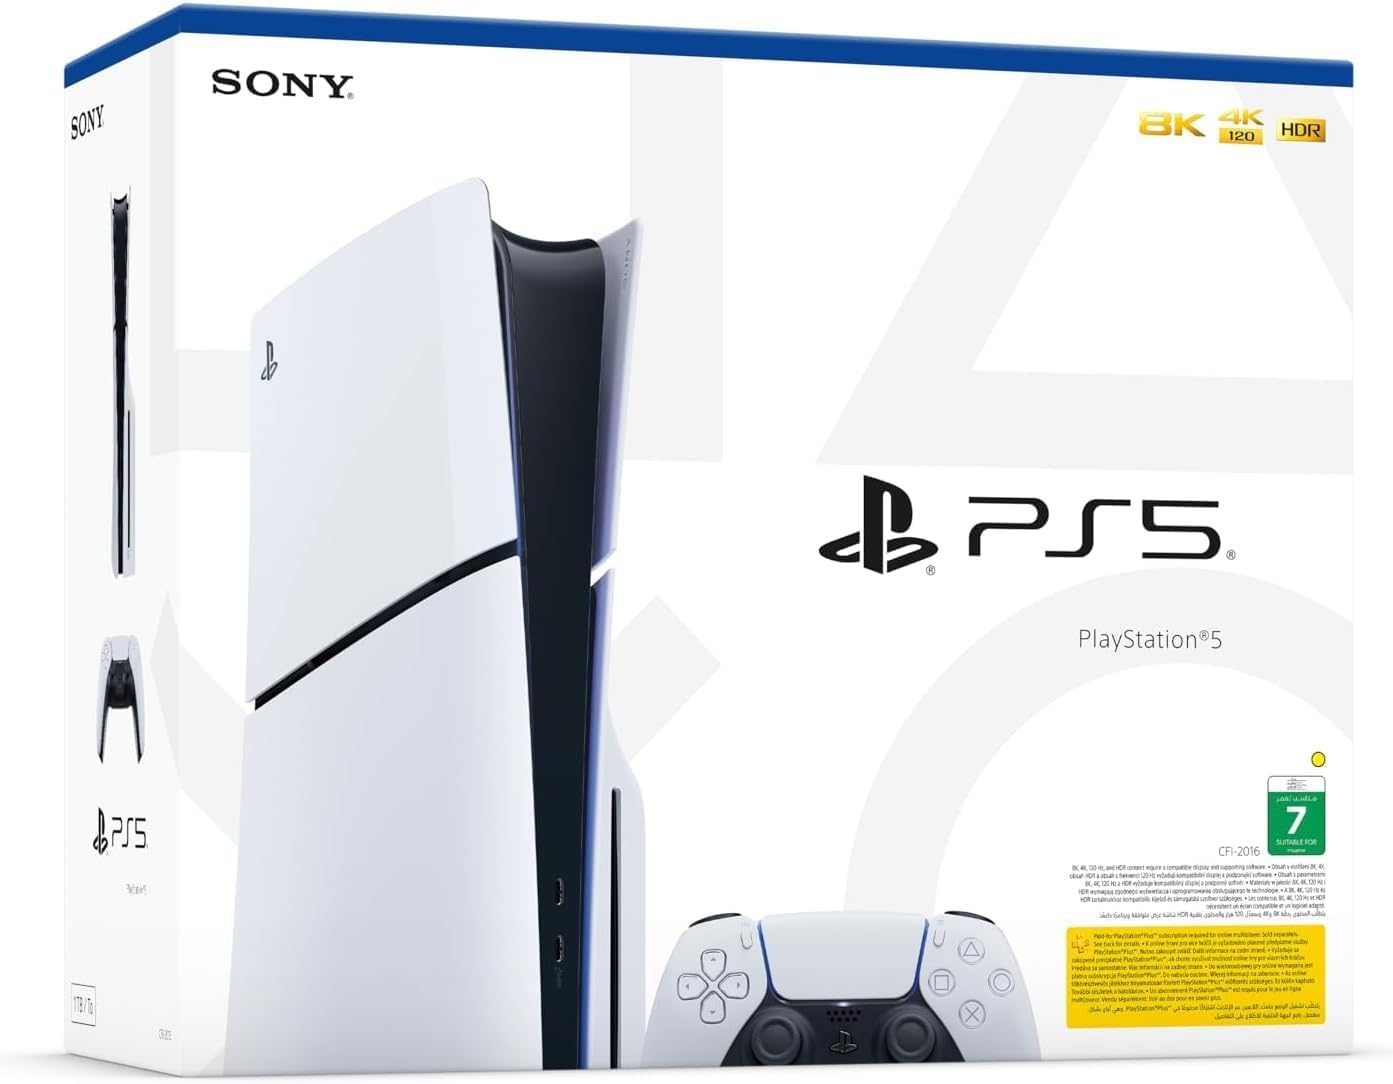 PlayStation 5 With Blu-Ray Disc Console (SLIM) - KSA Version, 2 Year Manufacturer Warranty